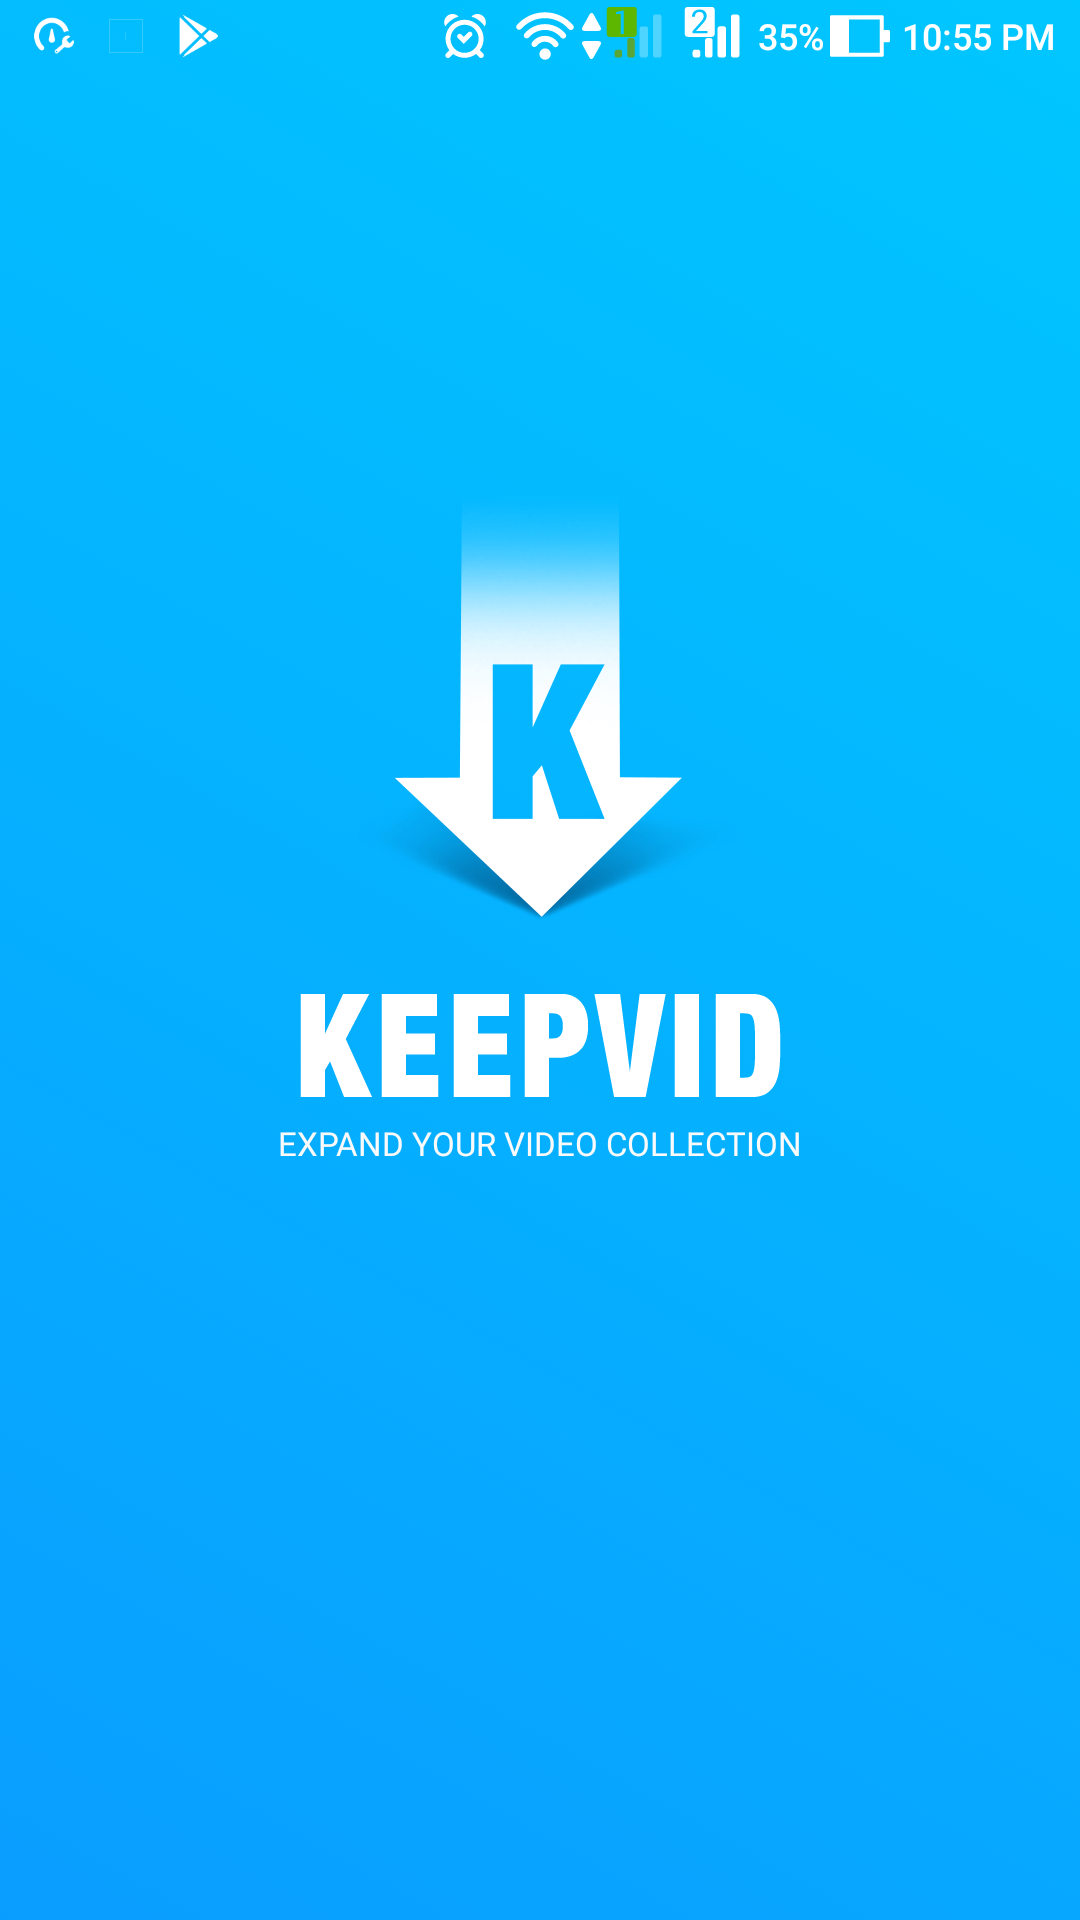 Download HD videos fast with KeepVid YouTube Video Downloader [Android] | dotTech